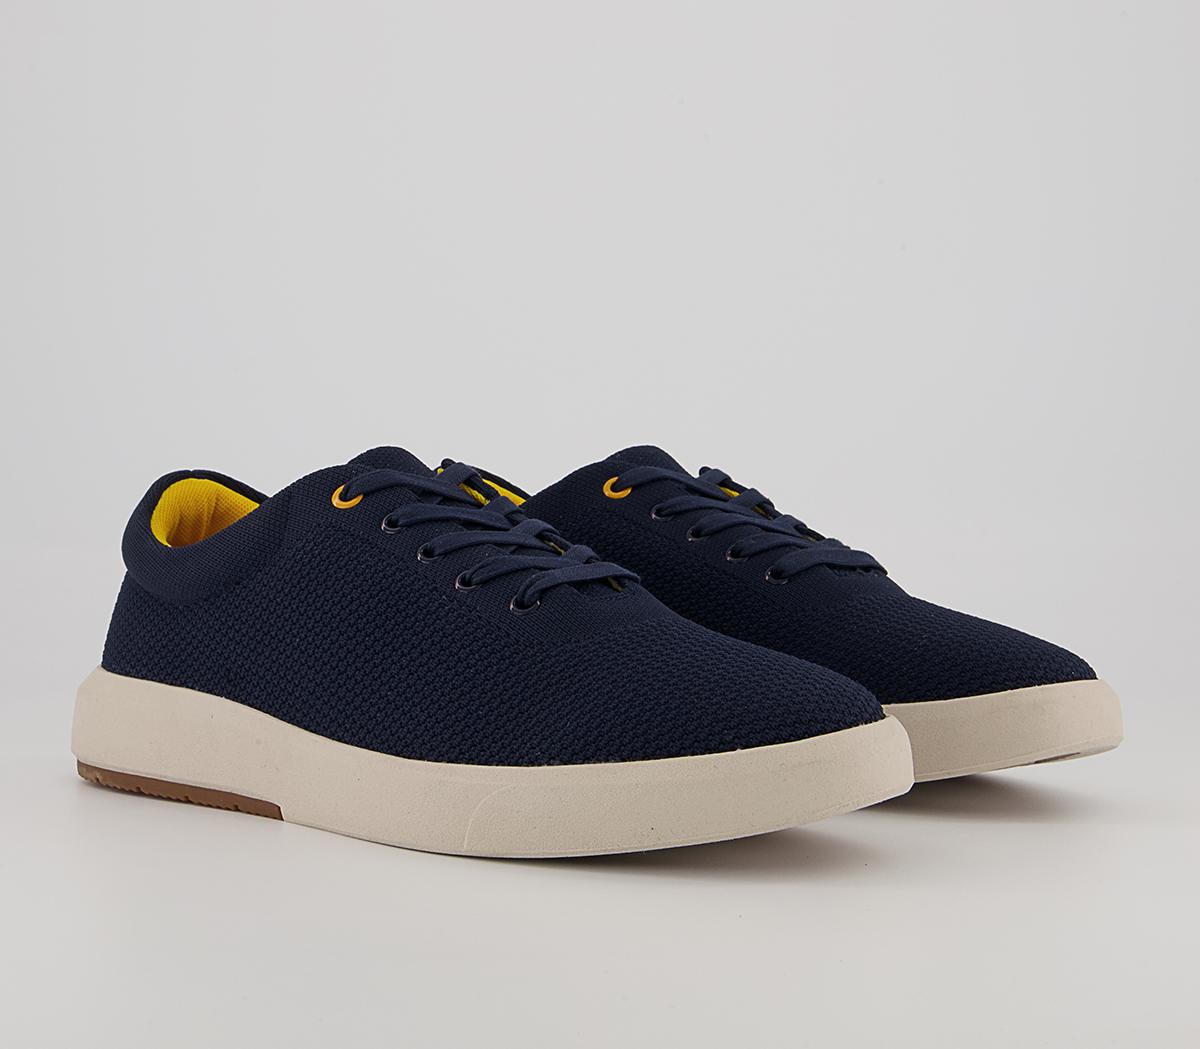 OFFICE Callow Knitted Wedge Sneakers Navy - Men's Casual Shoes